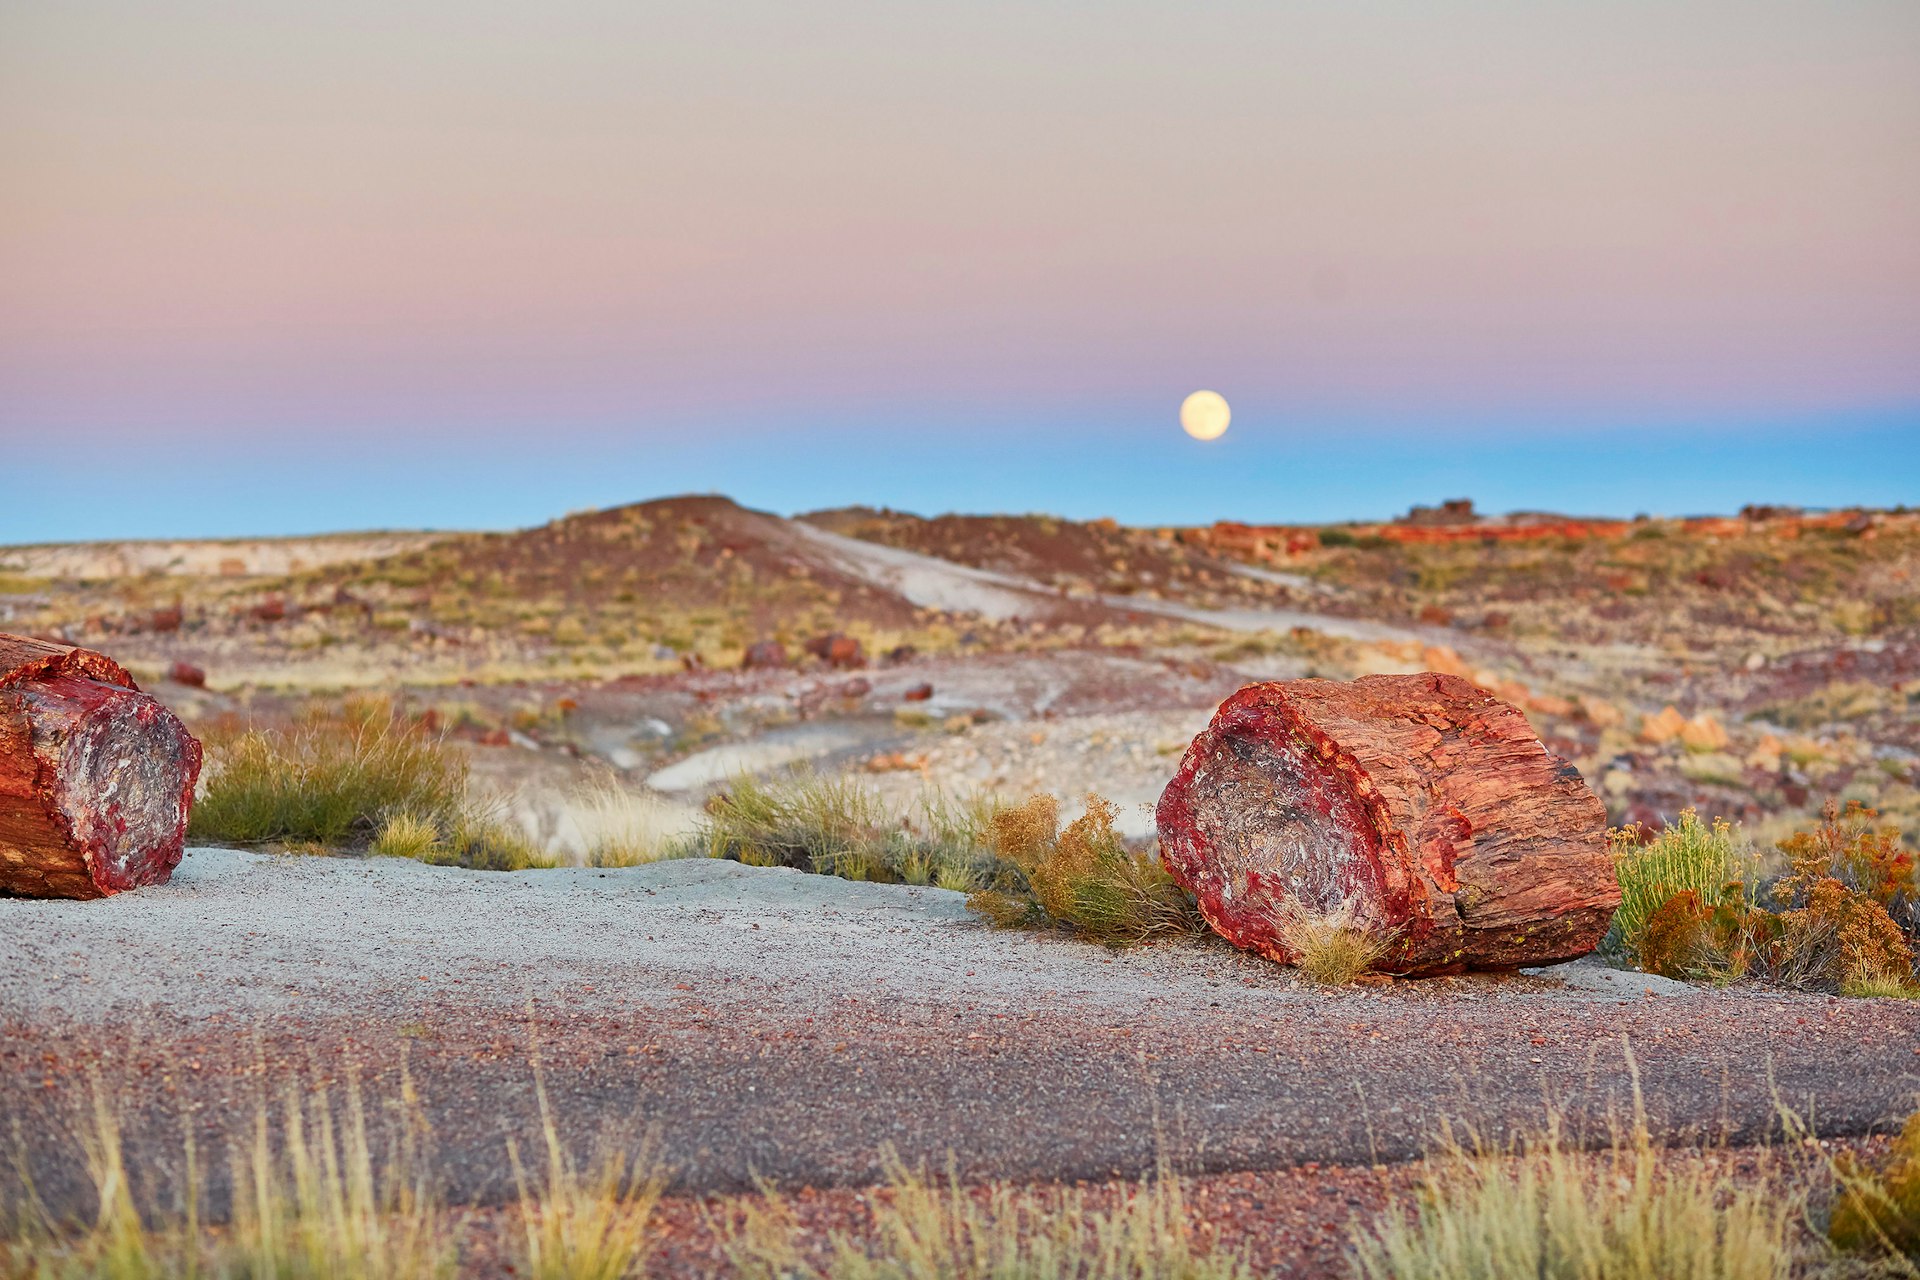 Two petrified logs on tarmac at the edge of badlands. The moon is rising in the background